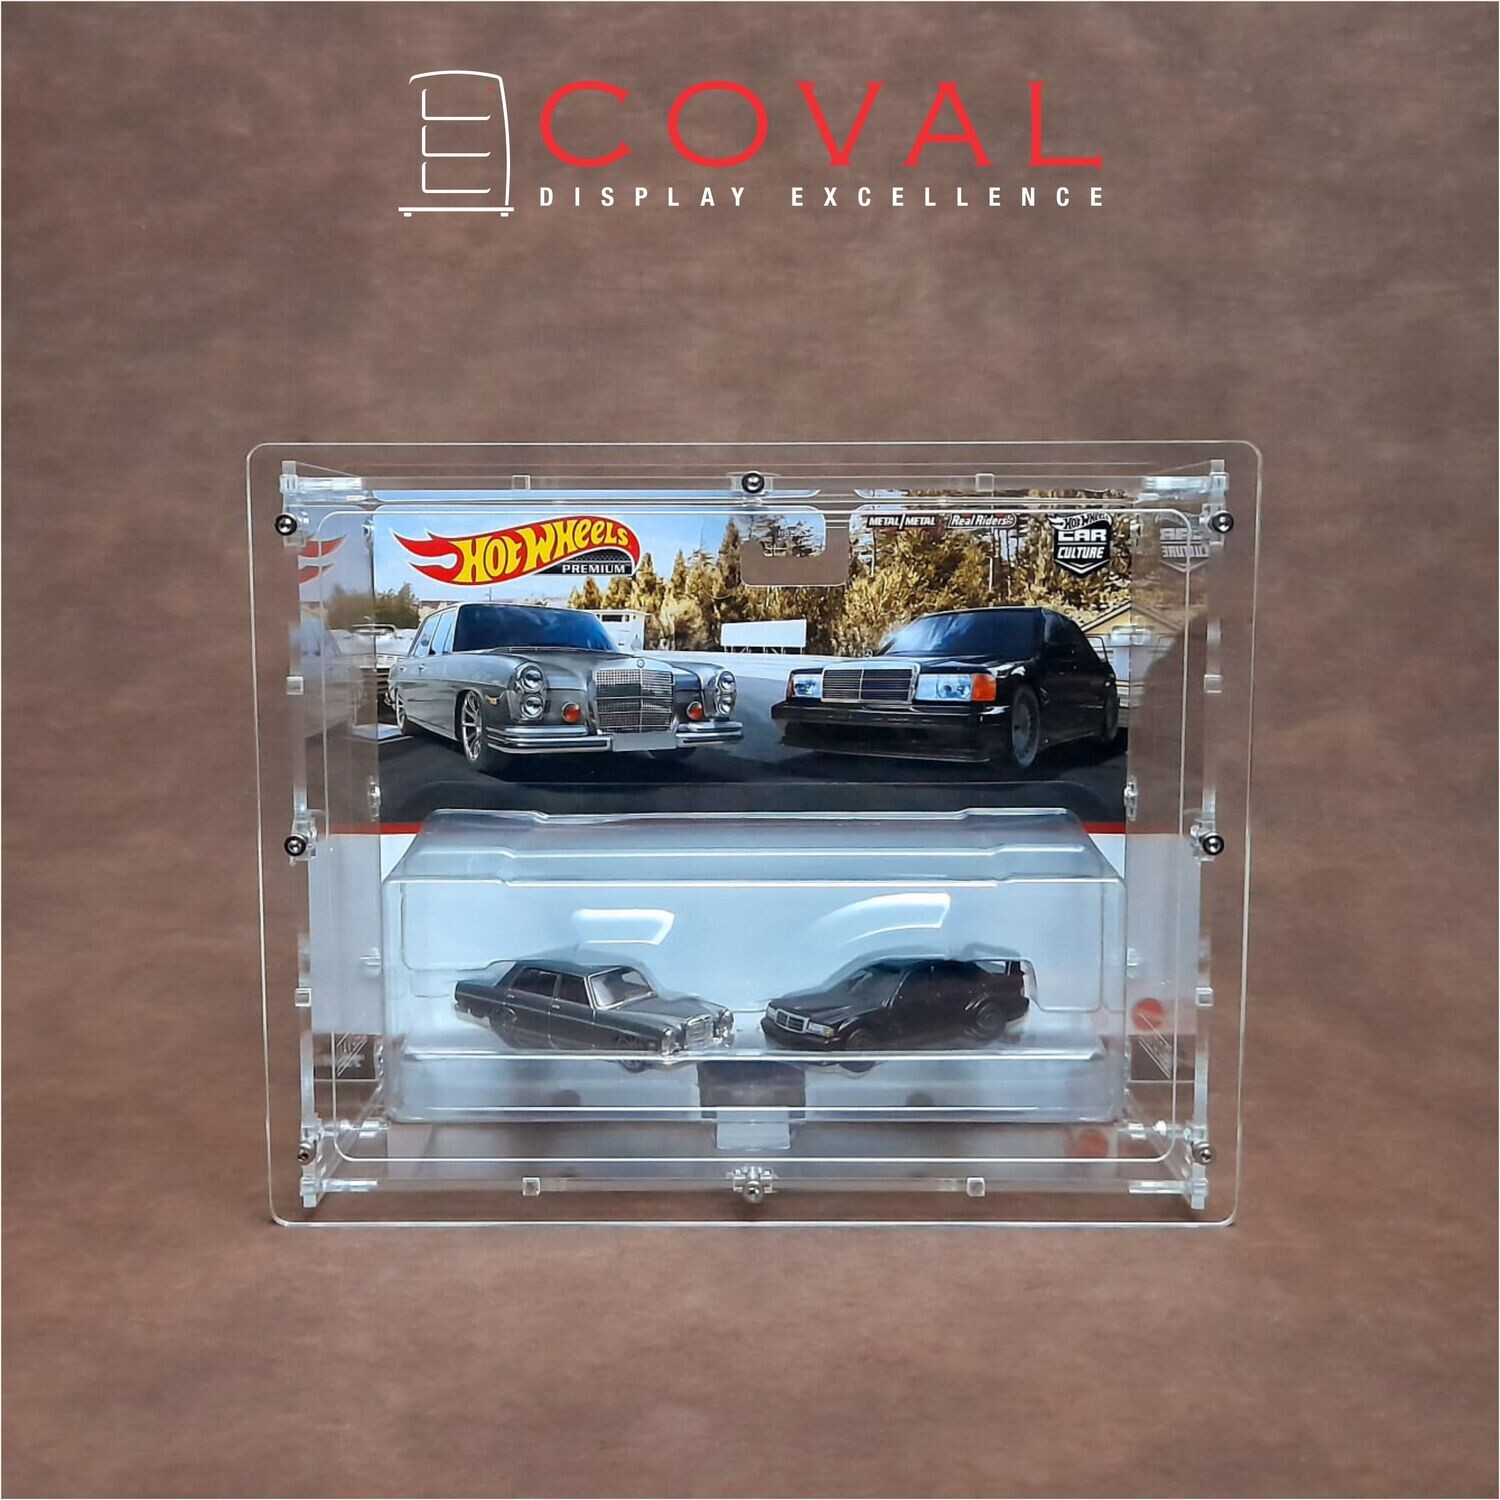 3 pcs COVAL HRC-101 Acrylic Display Case for Carded Basic Mainline Hot Wheels 